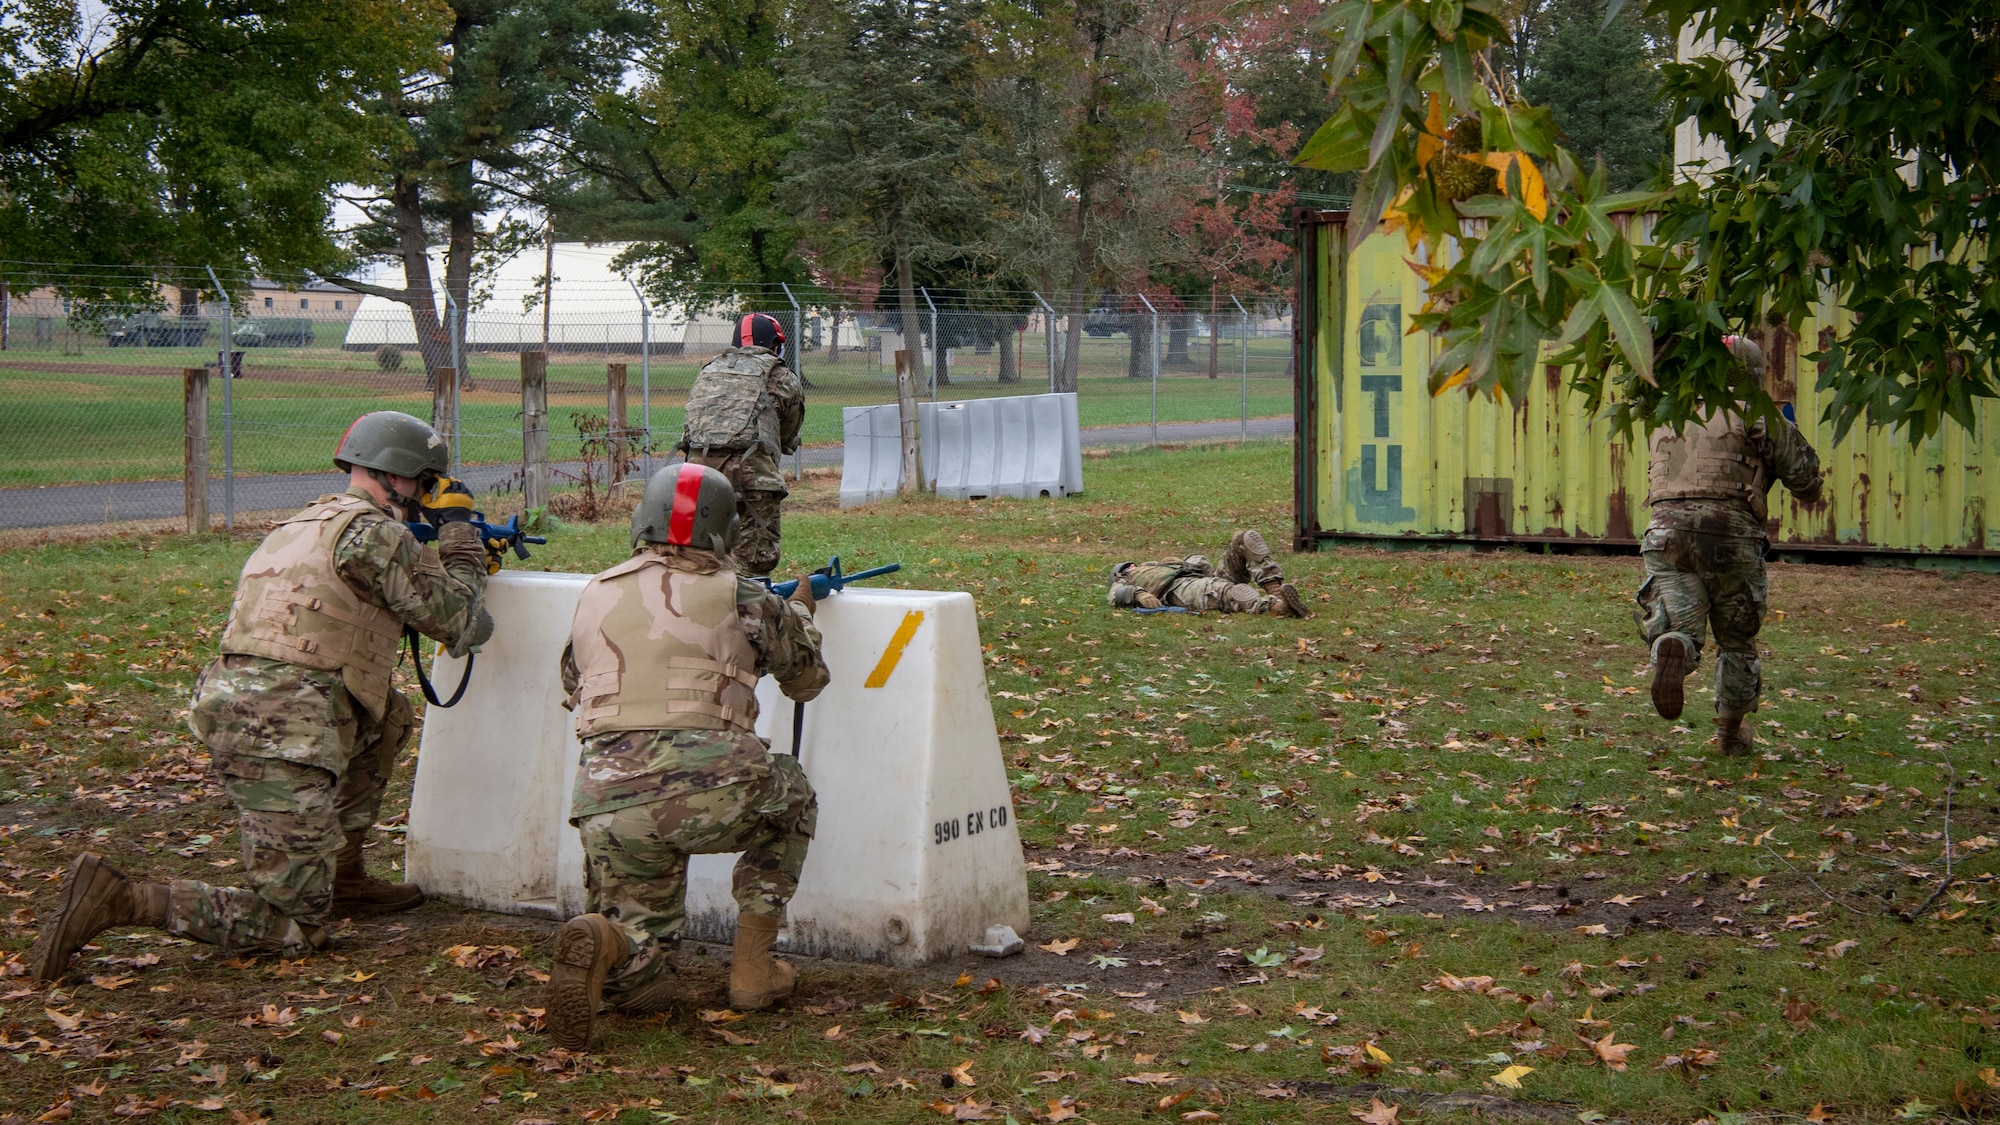 U.S. Airmen from the 514th Air Mobility Wing and the 421st Combat Training Squadron, both at Joint Base McGuire-Dix-Lakehurst, New Jersey, the 171st Air Refueling Wing, Pennsylvania, and the Office of the Surgeon General, Headquarters U.S. Air Force, Virginia, simulate retrieving a fallen comrade while providing tactical cover during the care under fire portion of a Tactical Combat Casualty Care course at the Medical Simulation and Training Center at JB MDL, N.J., October 31, 2021. The course was designed to provide members who are not normally involved in combat environments the skills to survive and care for casualties in the event they are under attack.